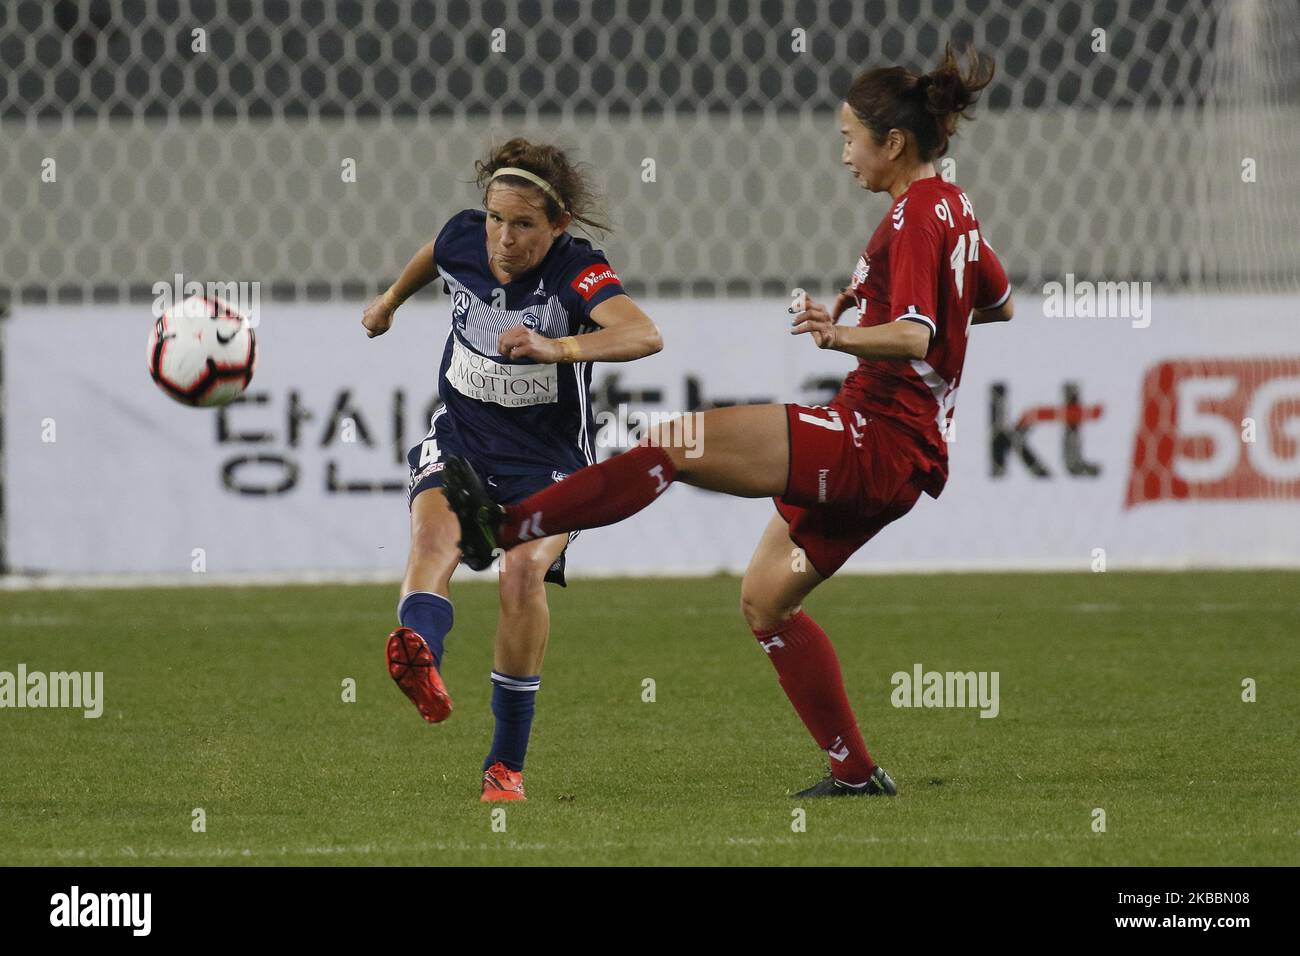 Emily Townsend Menges of Melbourne Victory and Lee Seaeun of Incheon Hyundai Steel Red Angels action during during an Women's Club Championship 2019-FIFA/AFC Pilot Tournamant Melbourne Victory V Incheon Hyundai Steel Red Angels at Yongin Citizens Sports Park in Yongin, South Korea, on November 26, 2019. Match Won Incheon Hyundai Steel Red Angels, Score by 4-0. (Photo by Seung-il Ryu/NurPhoto) Stock Photo